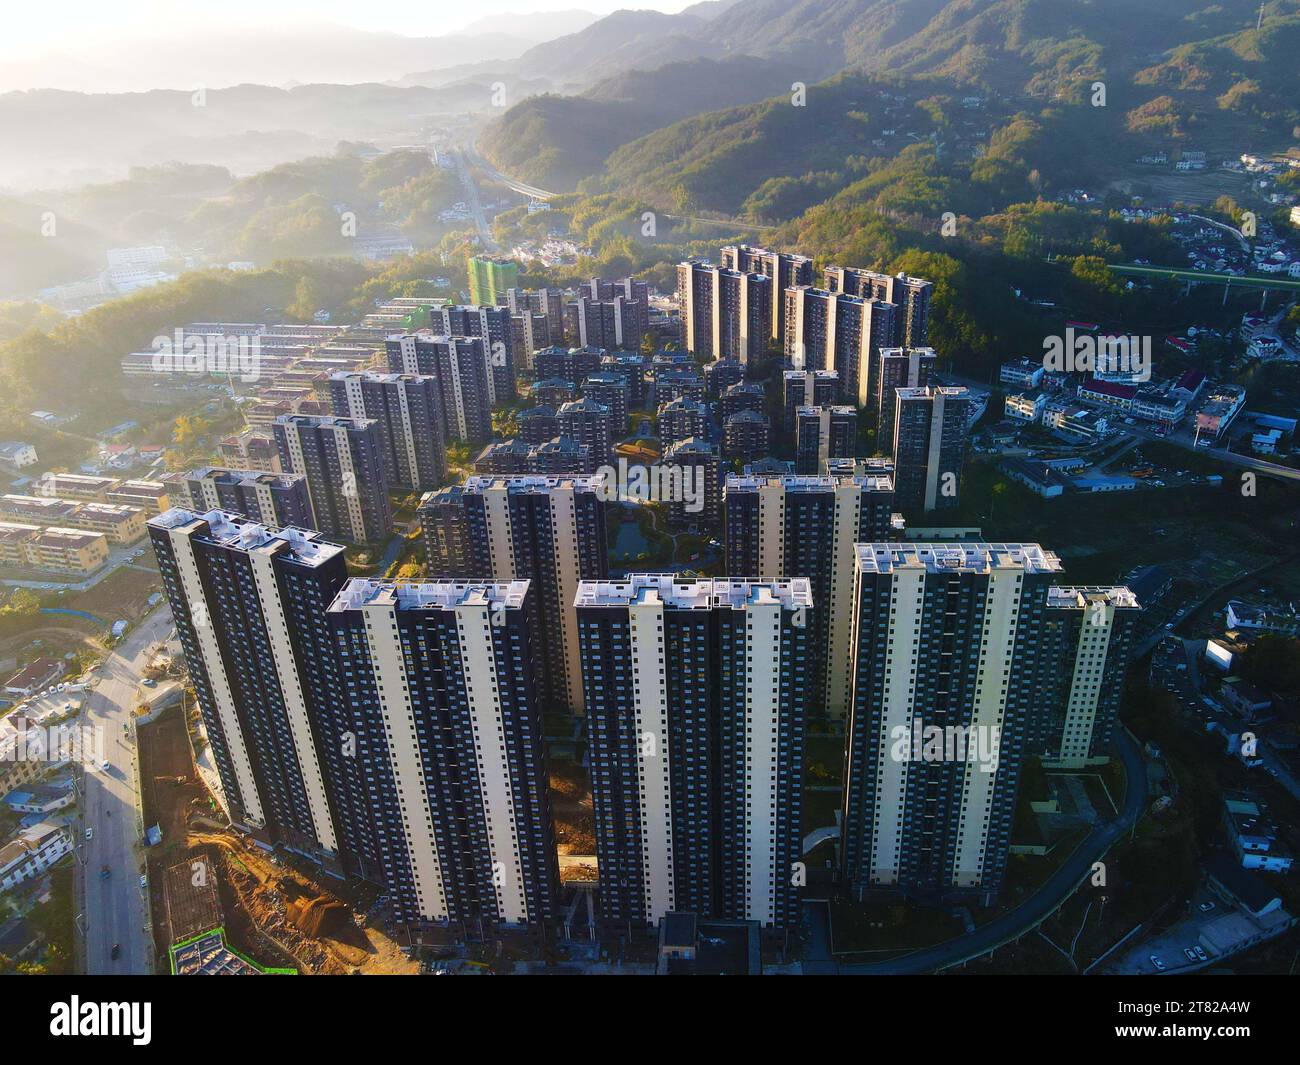 ANQING, CHINA - NOVEMBER 18, 2023 - A residential community in the mountains of Yuexi County, Anqing City, Anhui province, China, November 18, 2023. Stock Photo